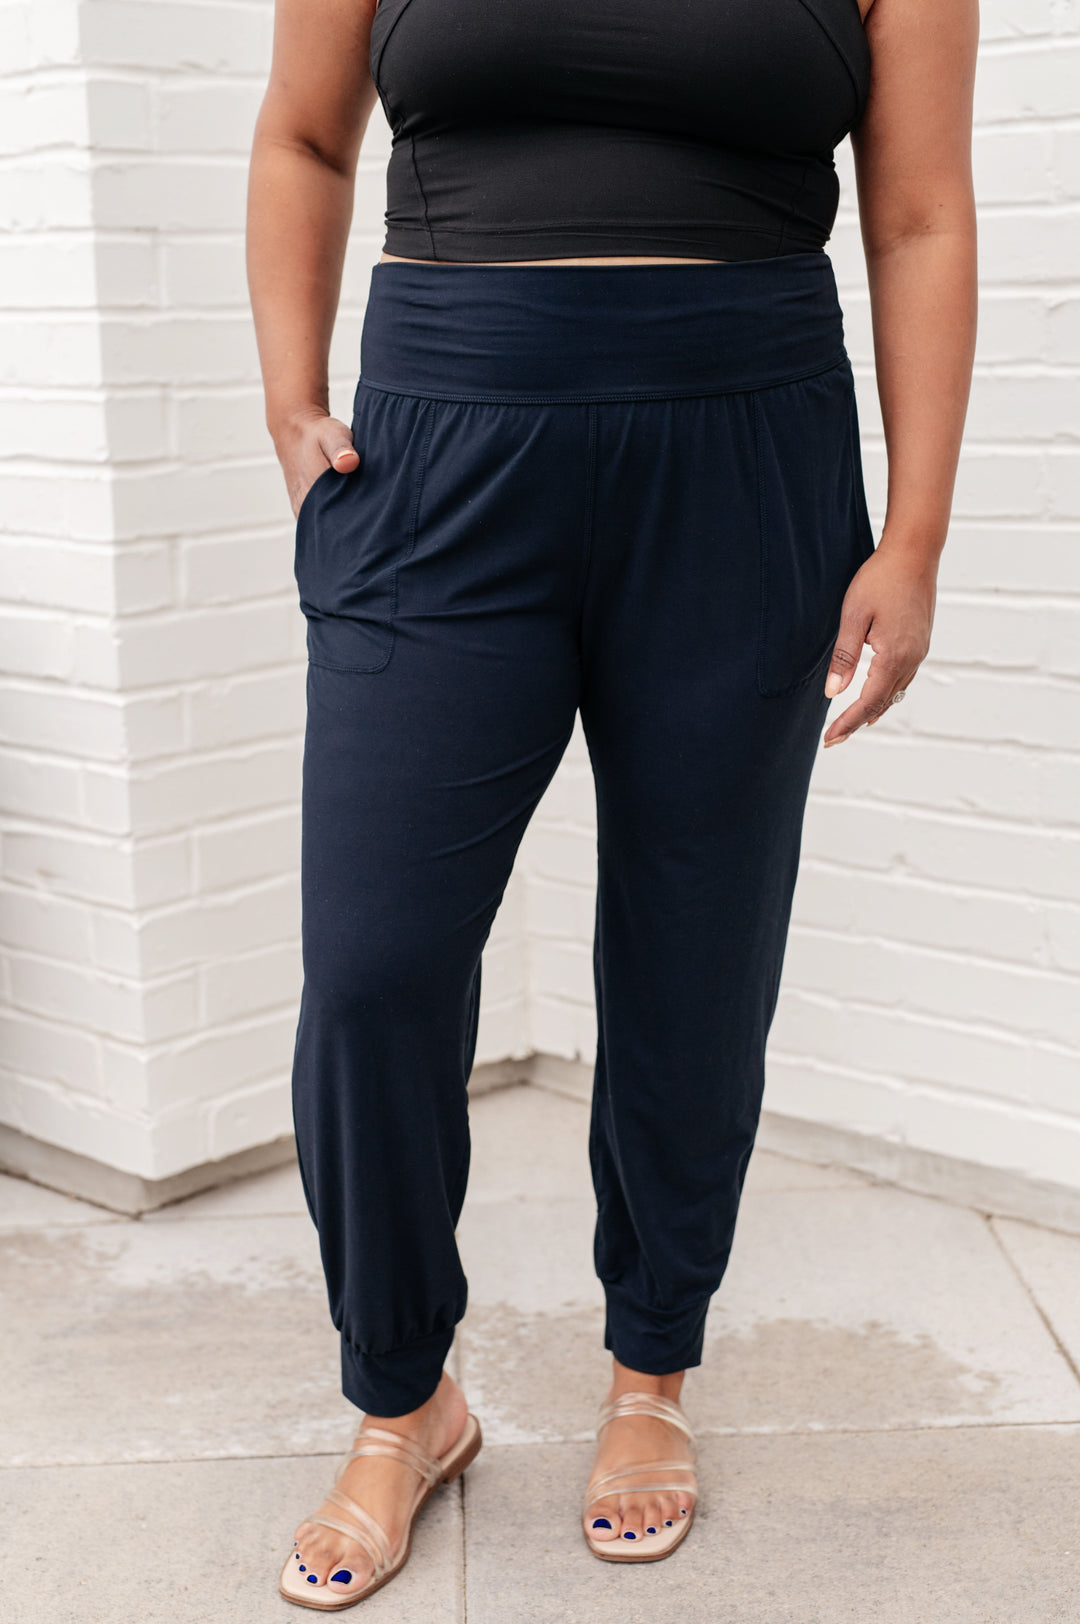 Always Accelerating Joggers in Nocturnal Navy-Pants-Inspired by Justeen-Women's Clothing Boutique in Chicago, Illinois